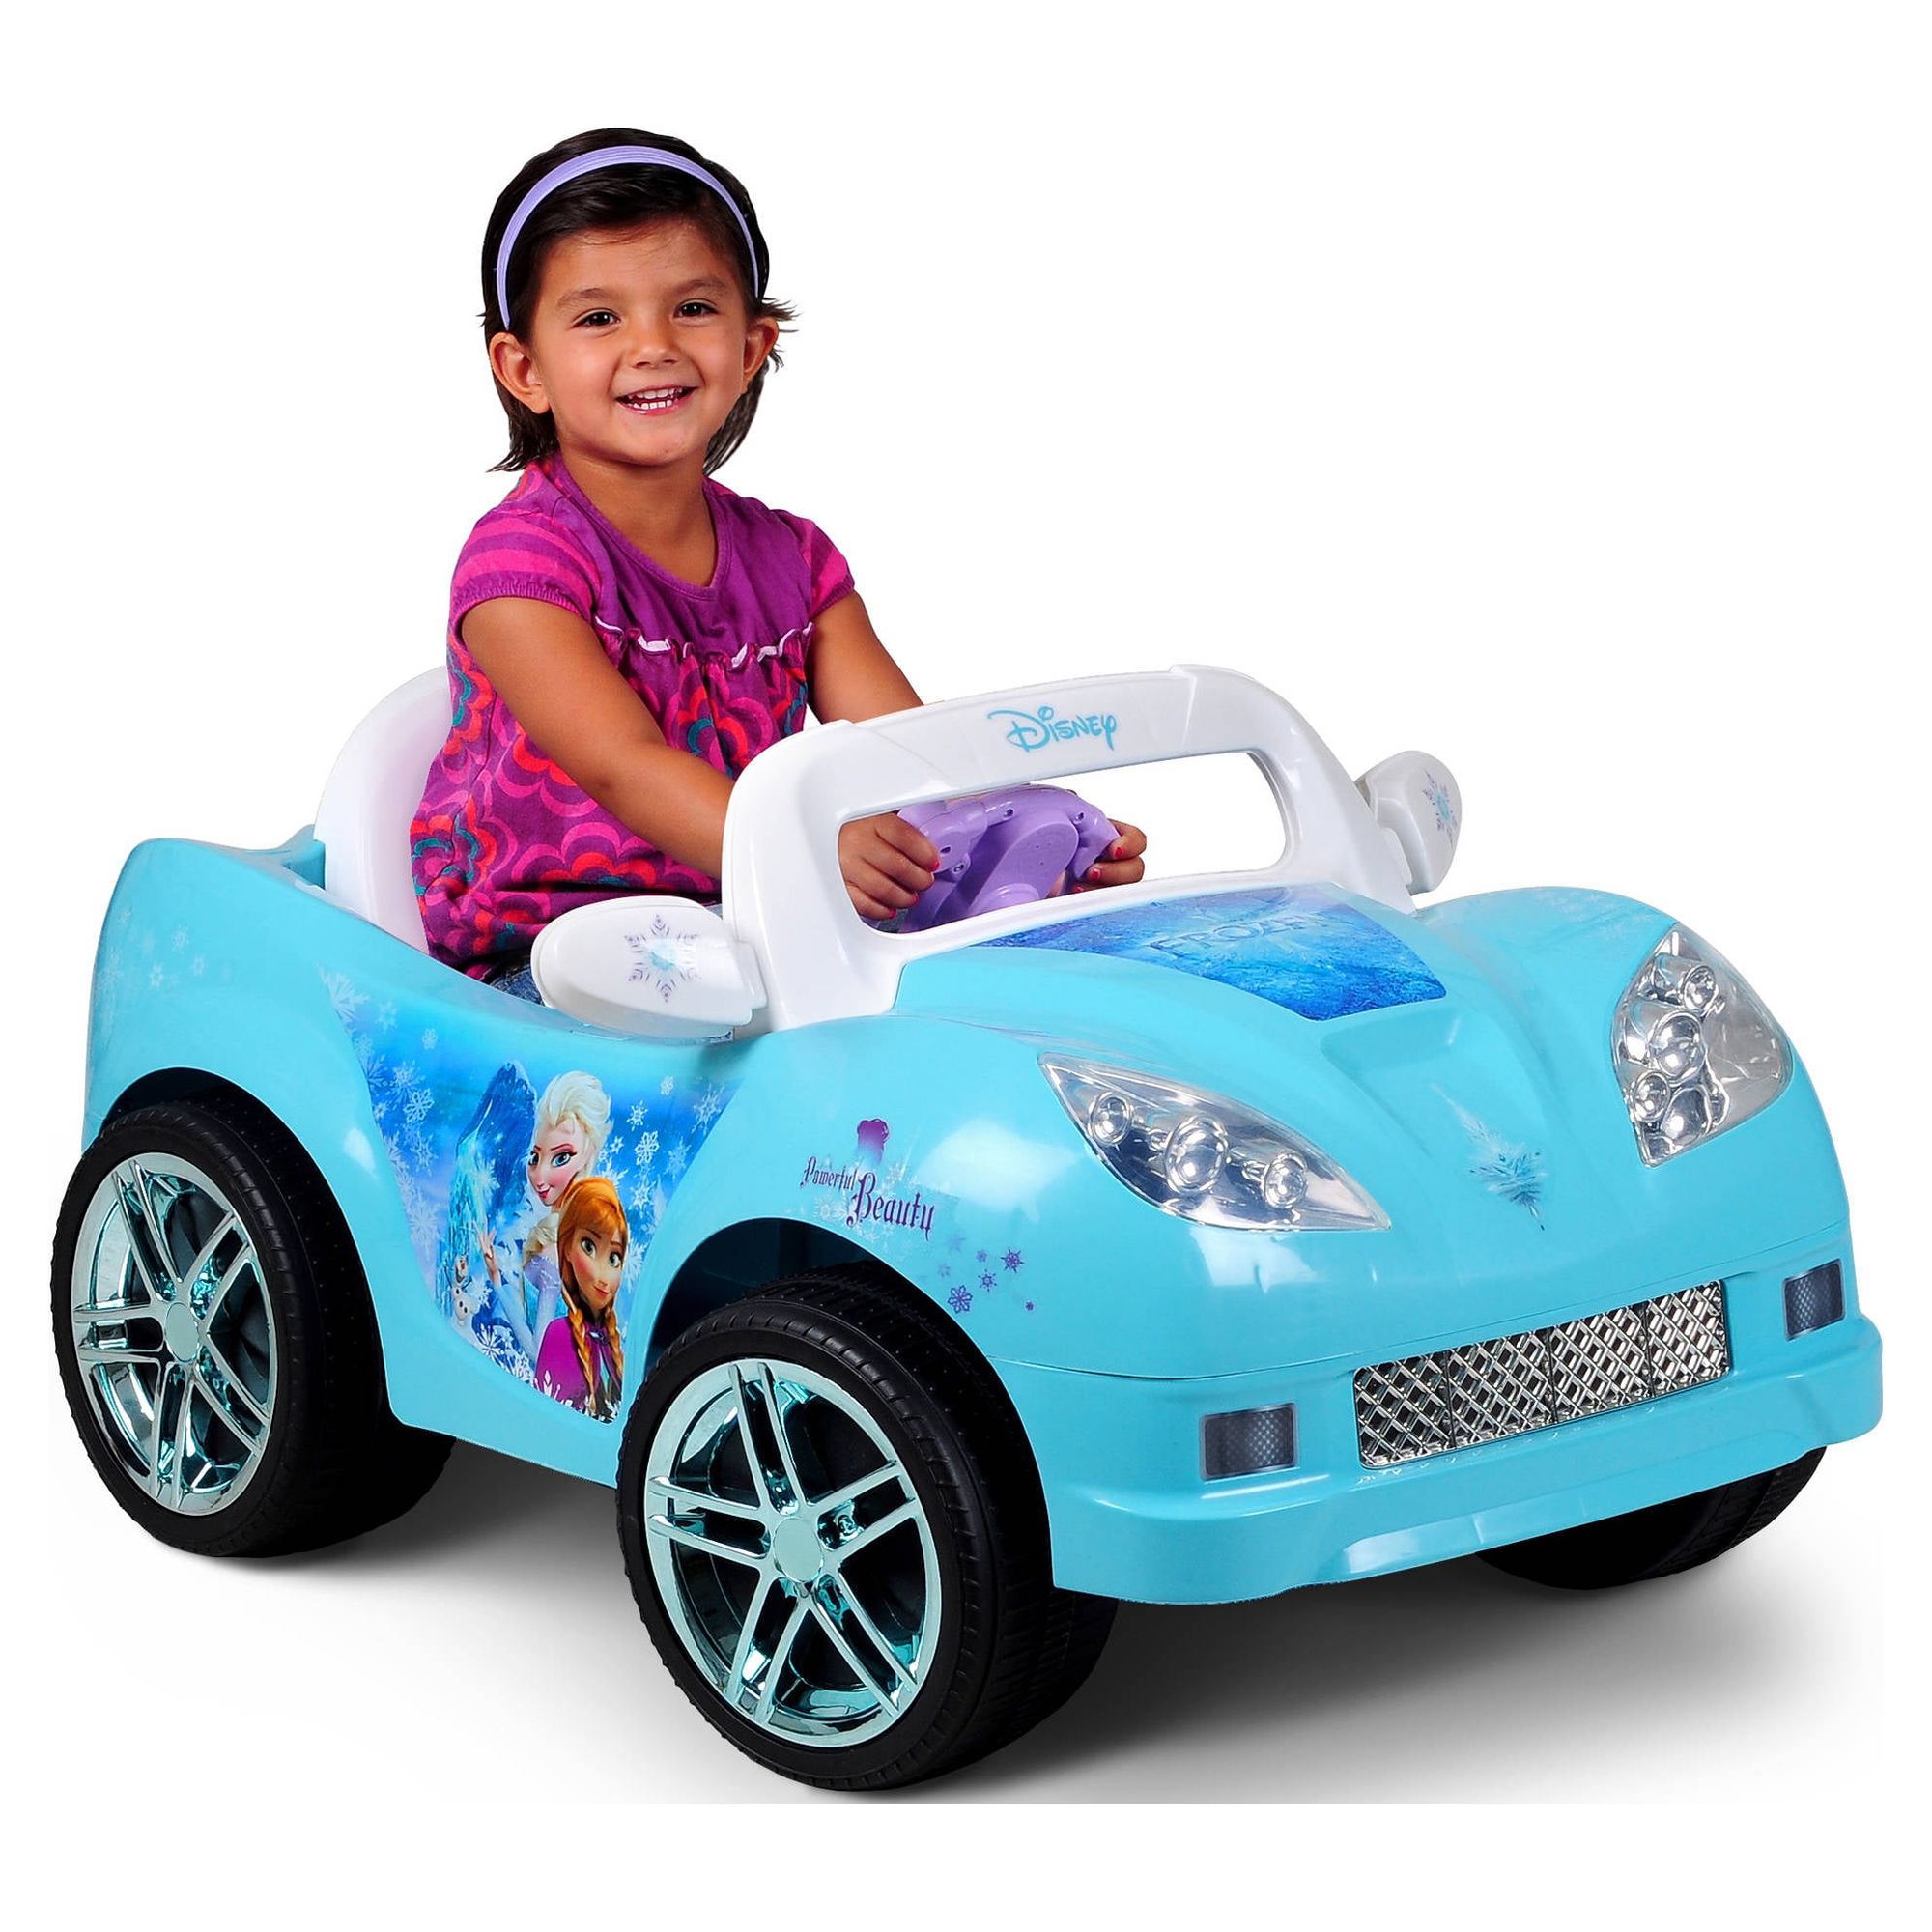 Disney Frozen Convertible Car 6-Volt Battery-Powered Ride-On - image 1 of 7